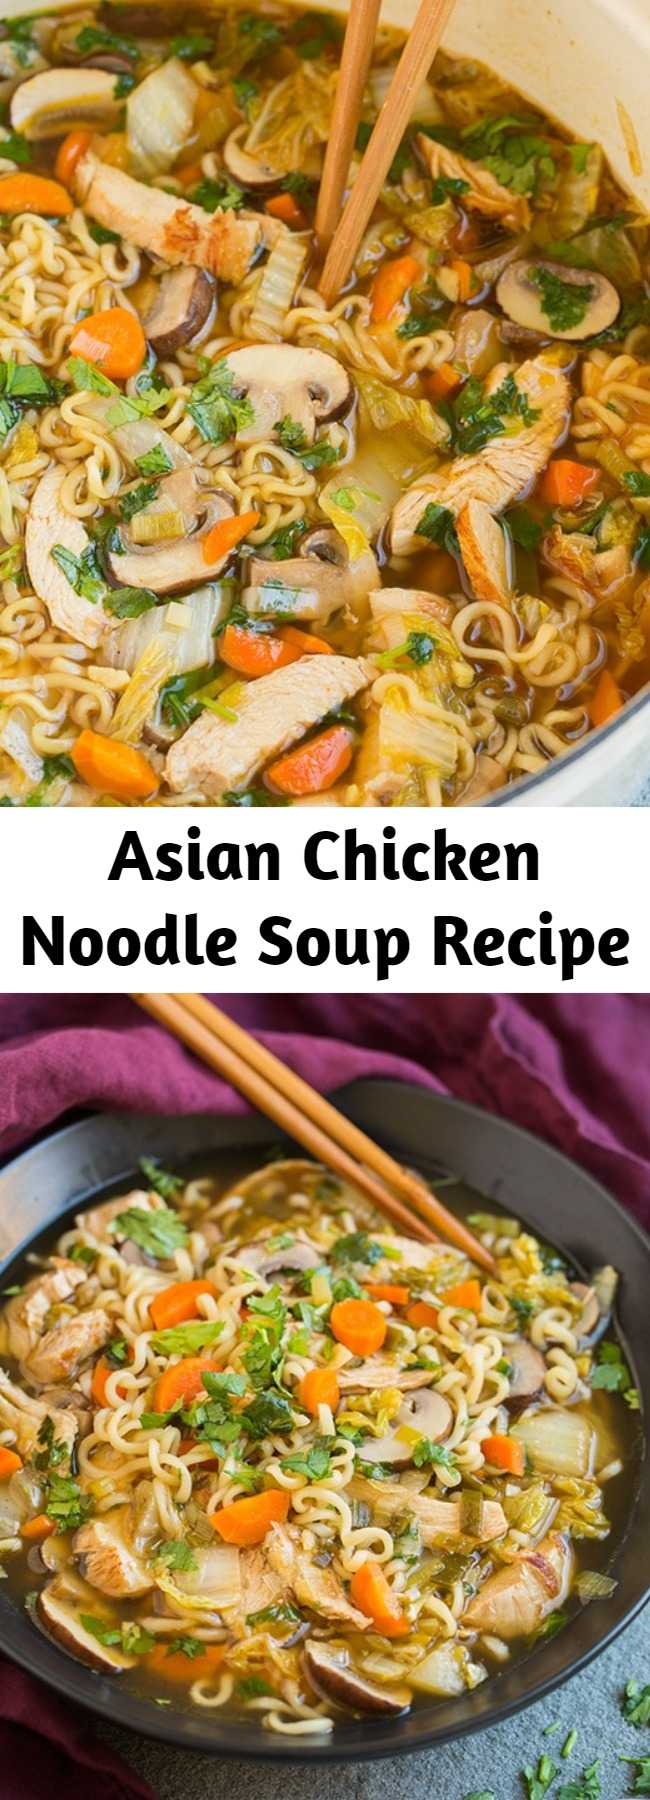 Asian Chicken Noodle Soup Recipe - Chicken noodle soup with a delicious Asian flair! Made with lot of fresh veggies, protein rich chicken, hearty ramen and a deliciously seasoned broth. It’s an Asian inspired soup you’ll crave over and over! Easy to make and perfect for a cold fall day!